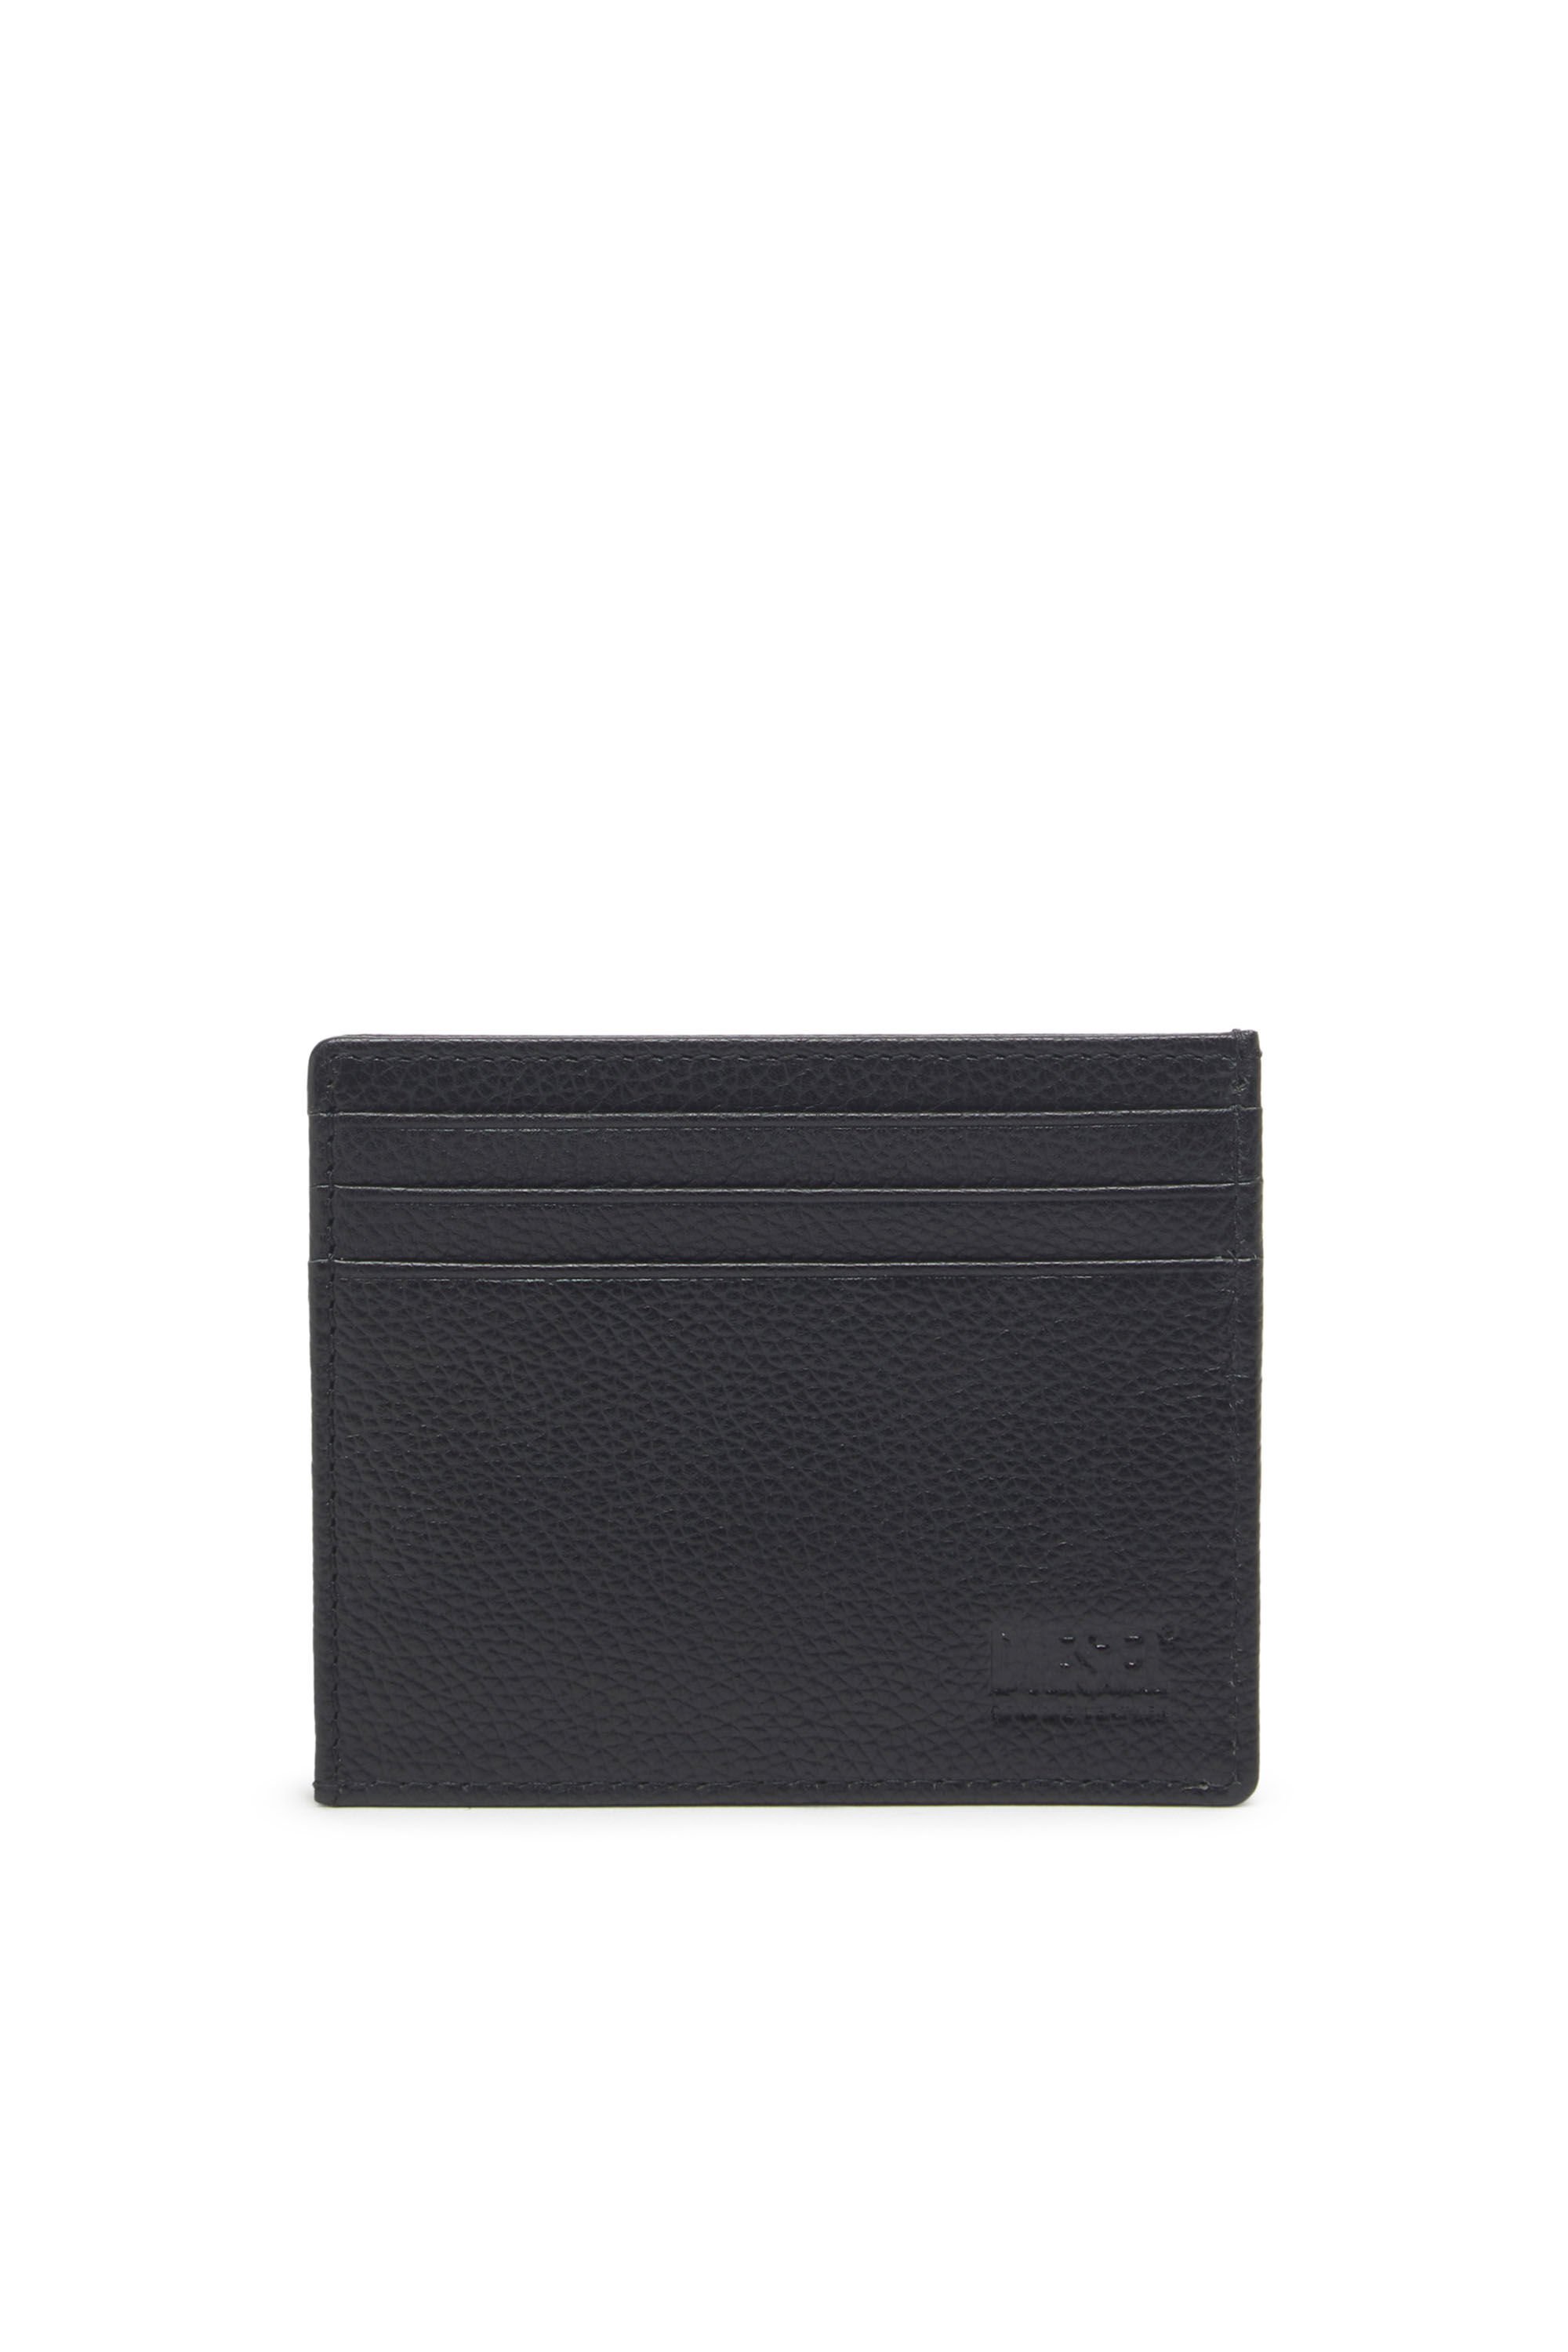 Diesel - CARD CASE, Man Card case in grained leather in Black - Image 2